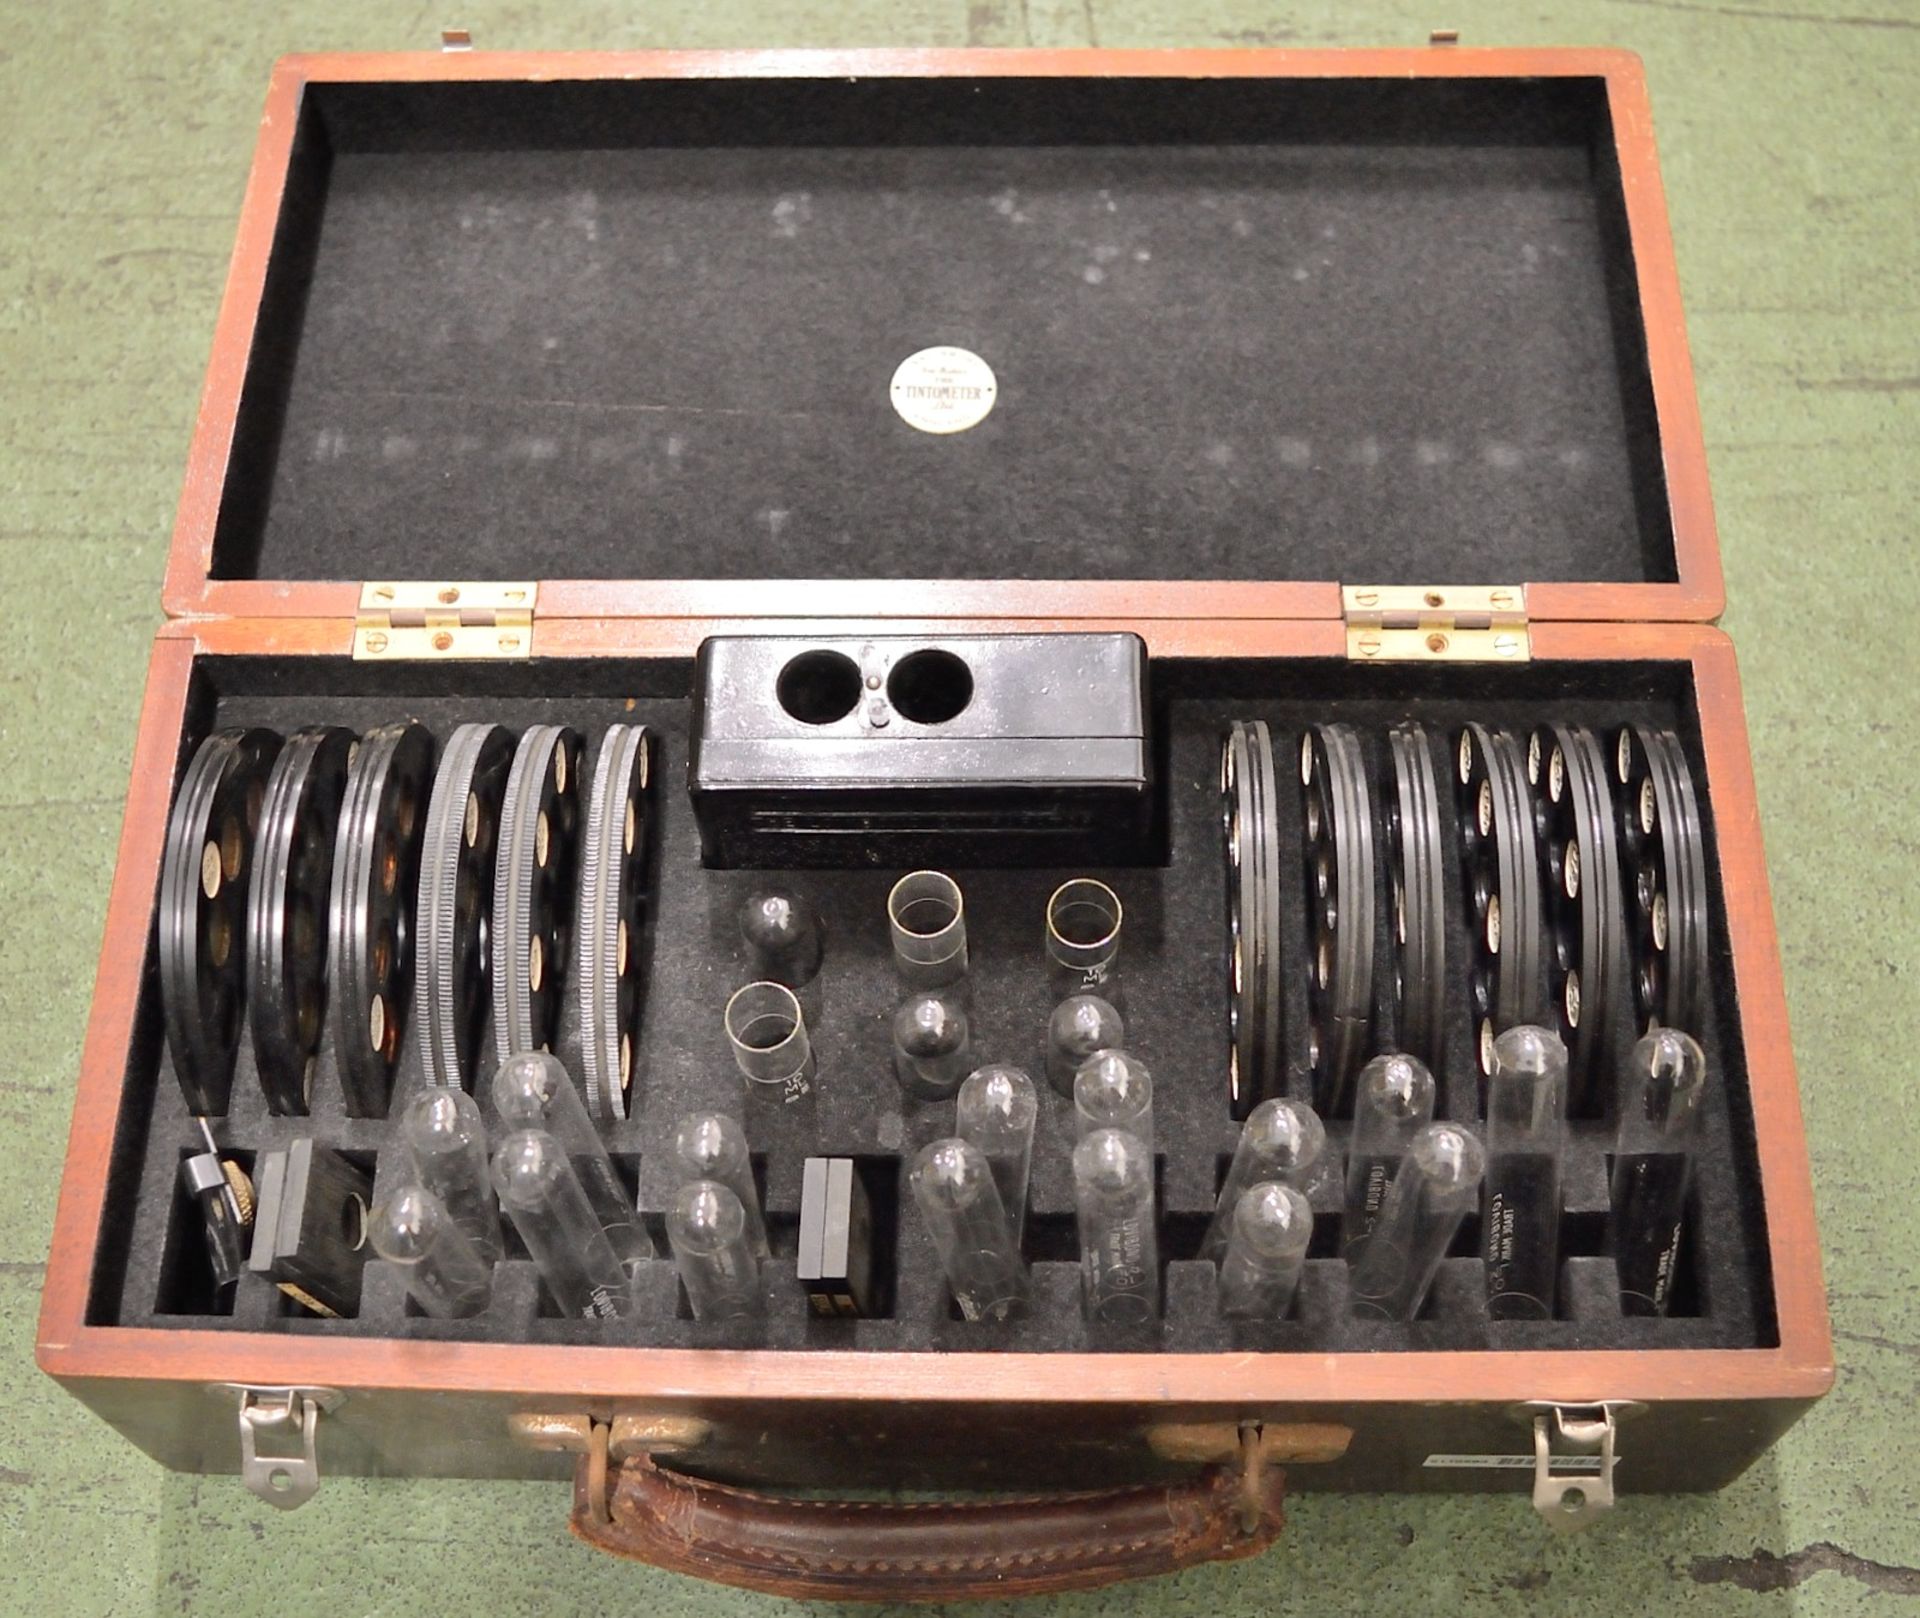 Tintometer / Lovibond Comparator with Test Tubes & Slides in Wooden Box.